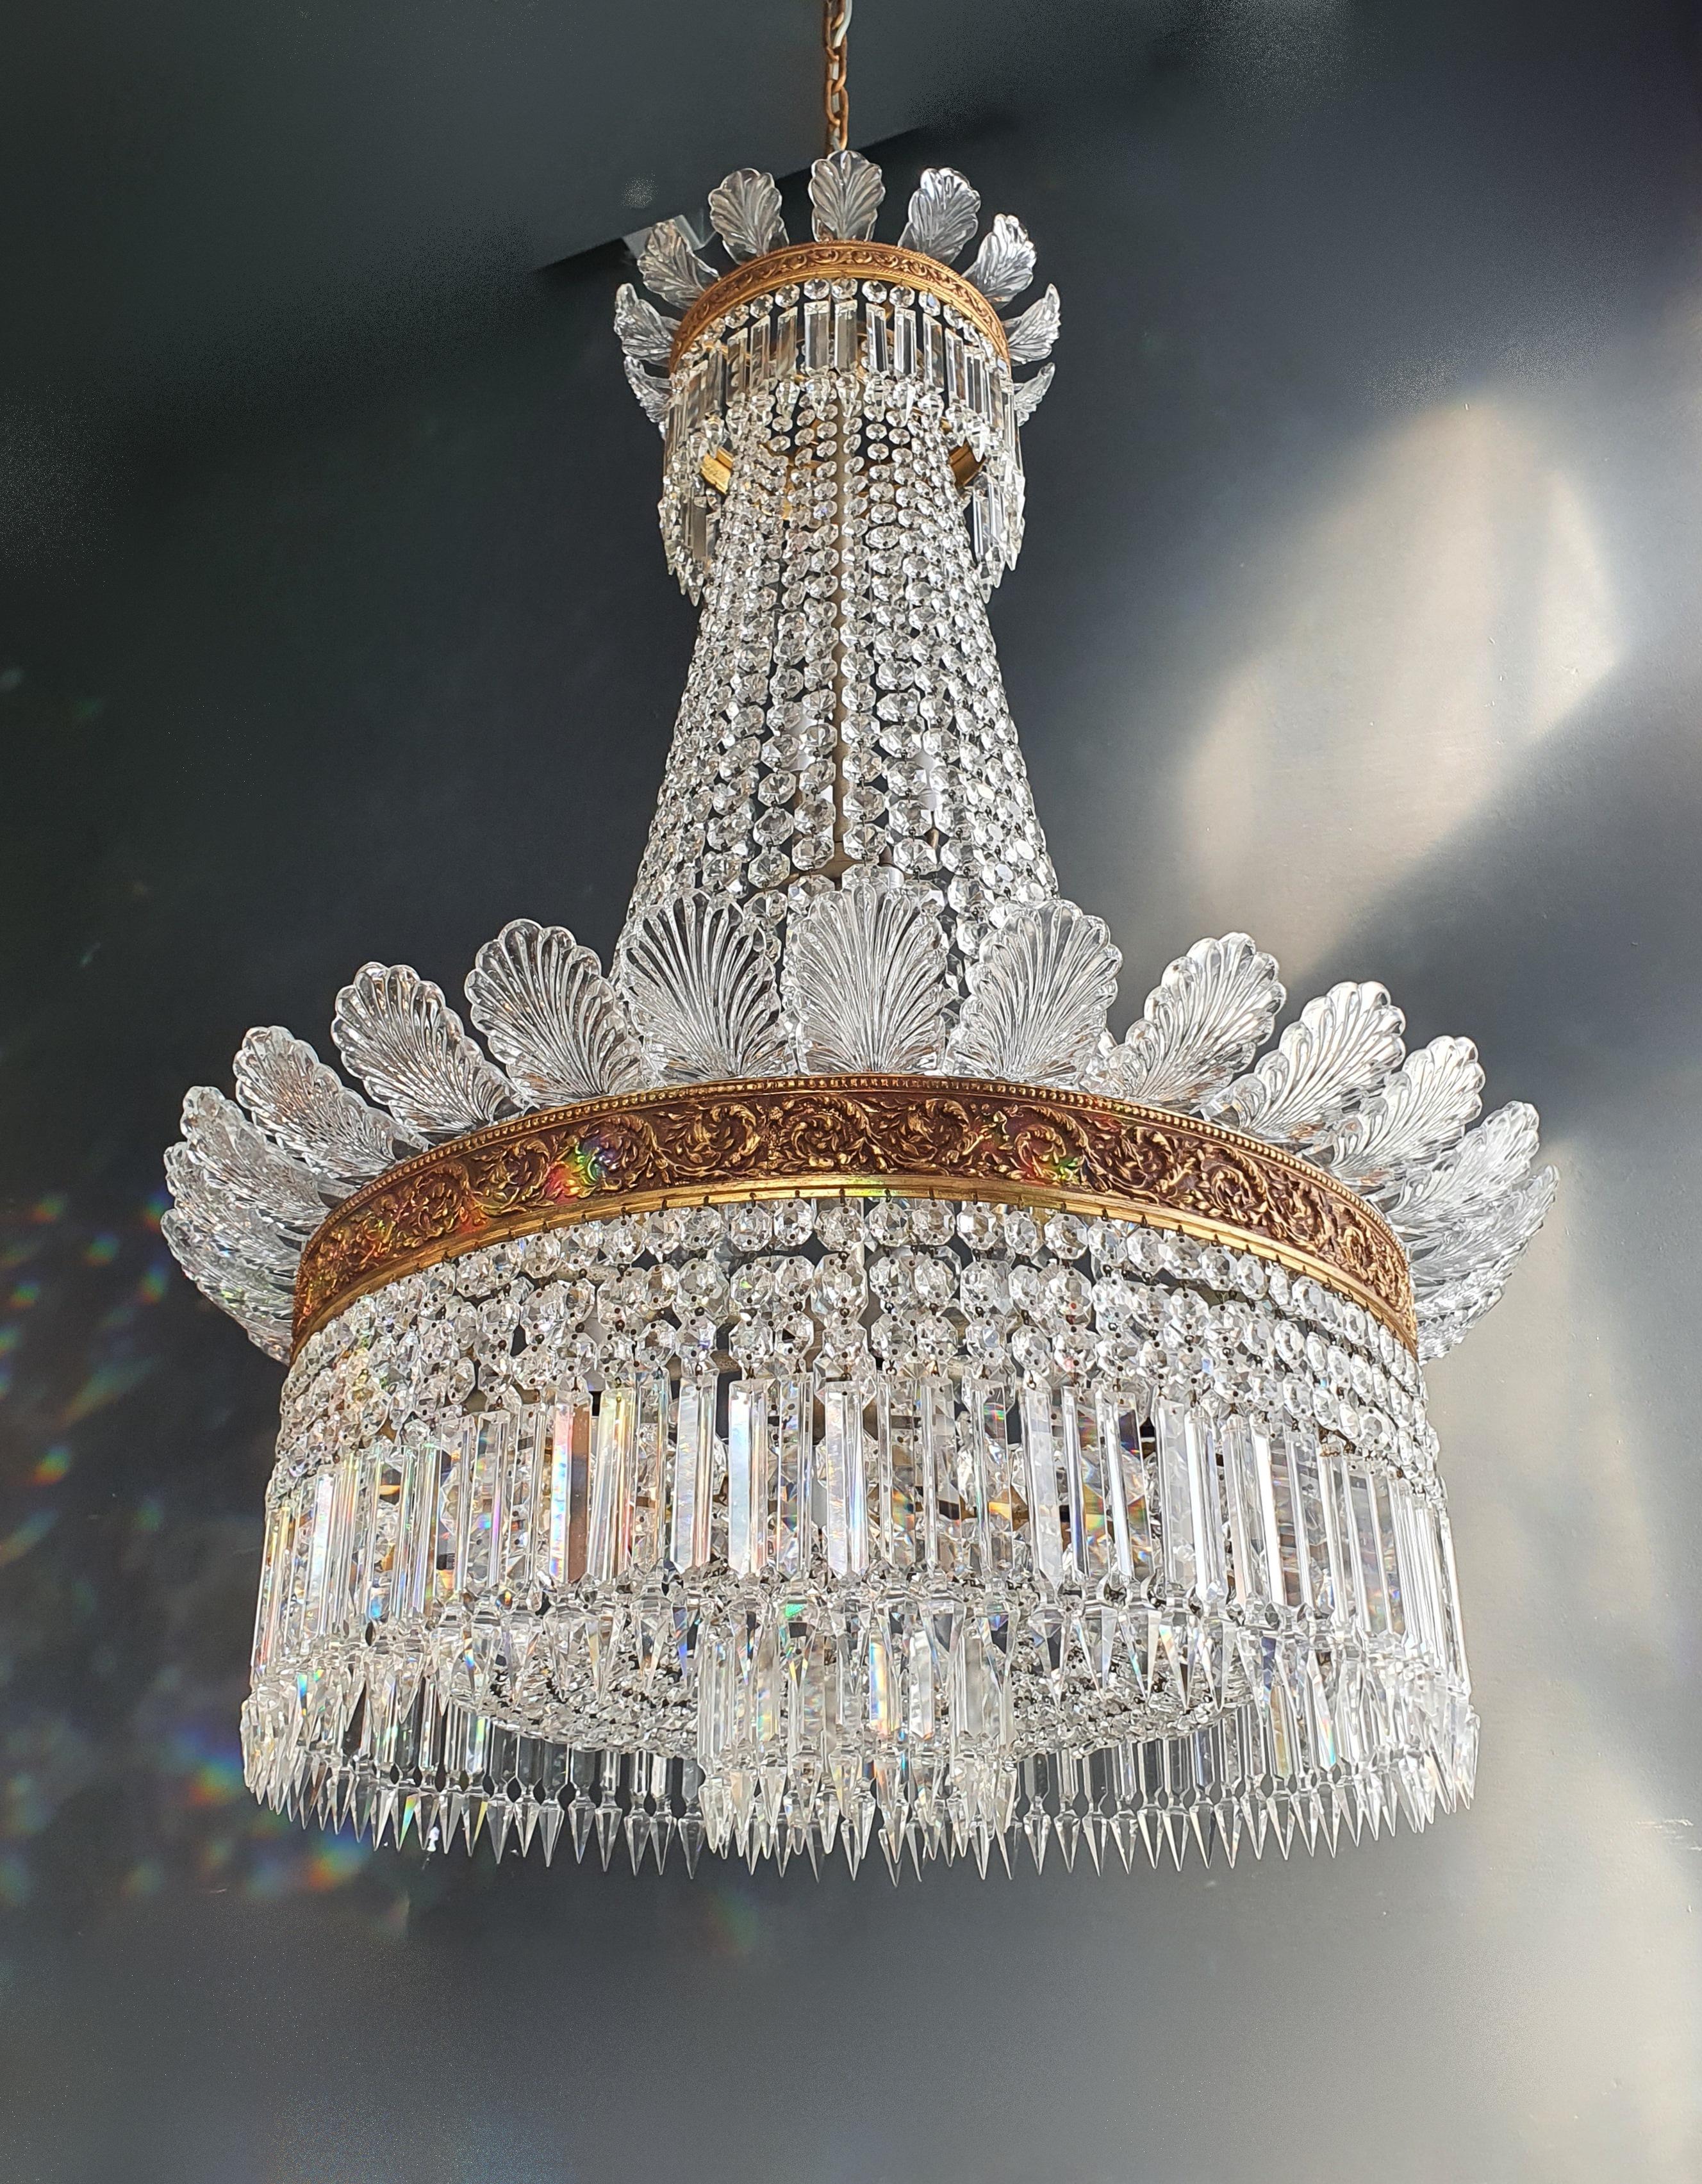 Mid-19th Century Basket Chandelier Crystal Empire Brass Sac a Pearl Lustre Ceiling Antique